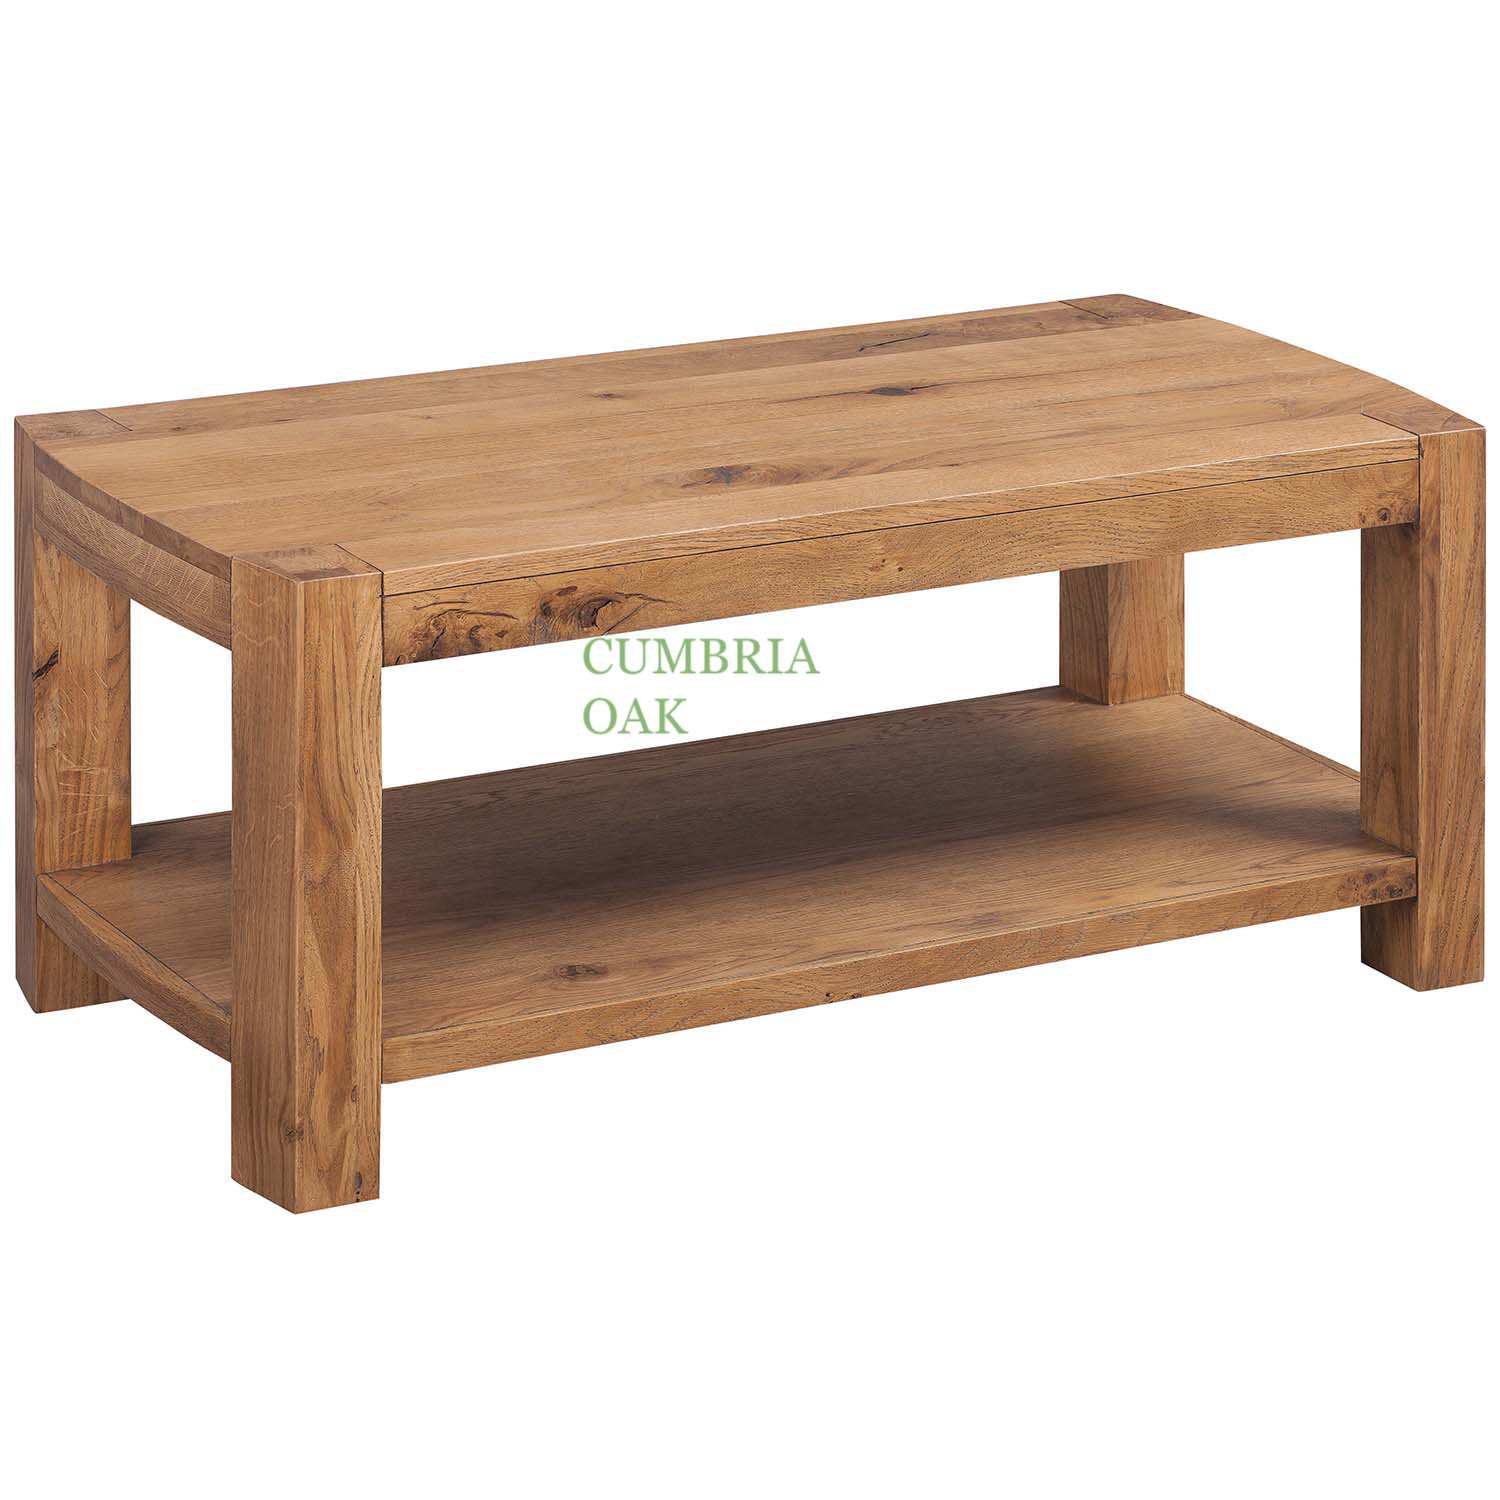 Troutbeck Oak Coffee Table With Shelf Cumbria Oak pertaining to sizing 1500 X 1500